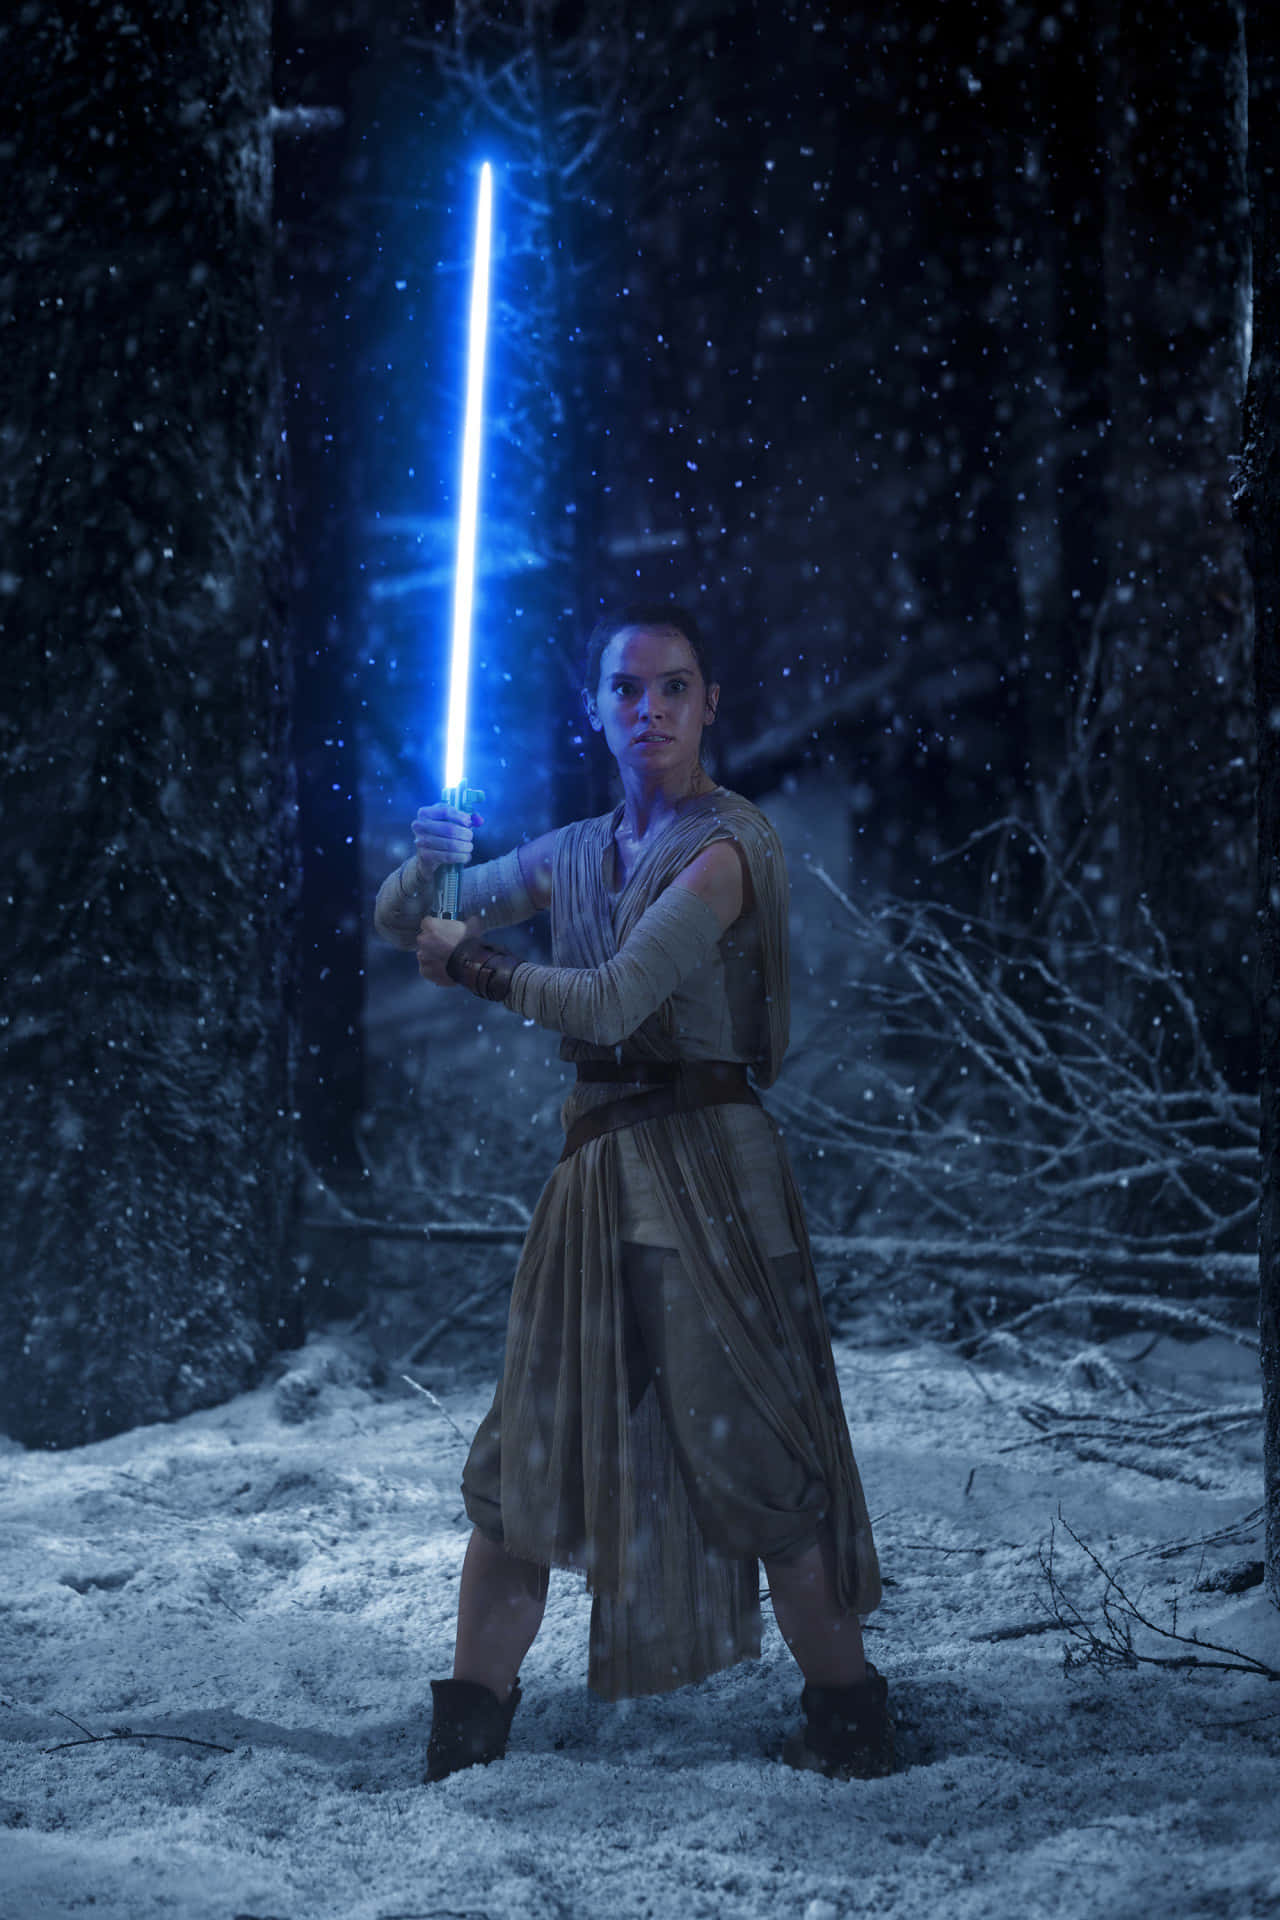 Rey with her Lightsaber in Star Wars Wallpaper